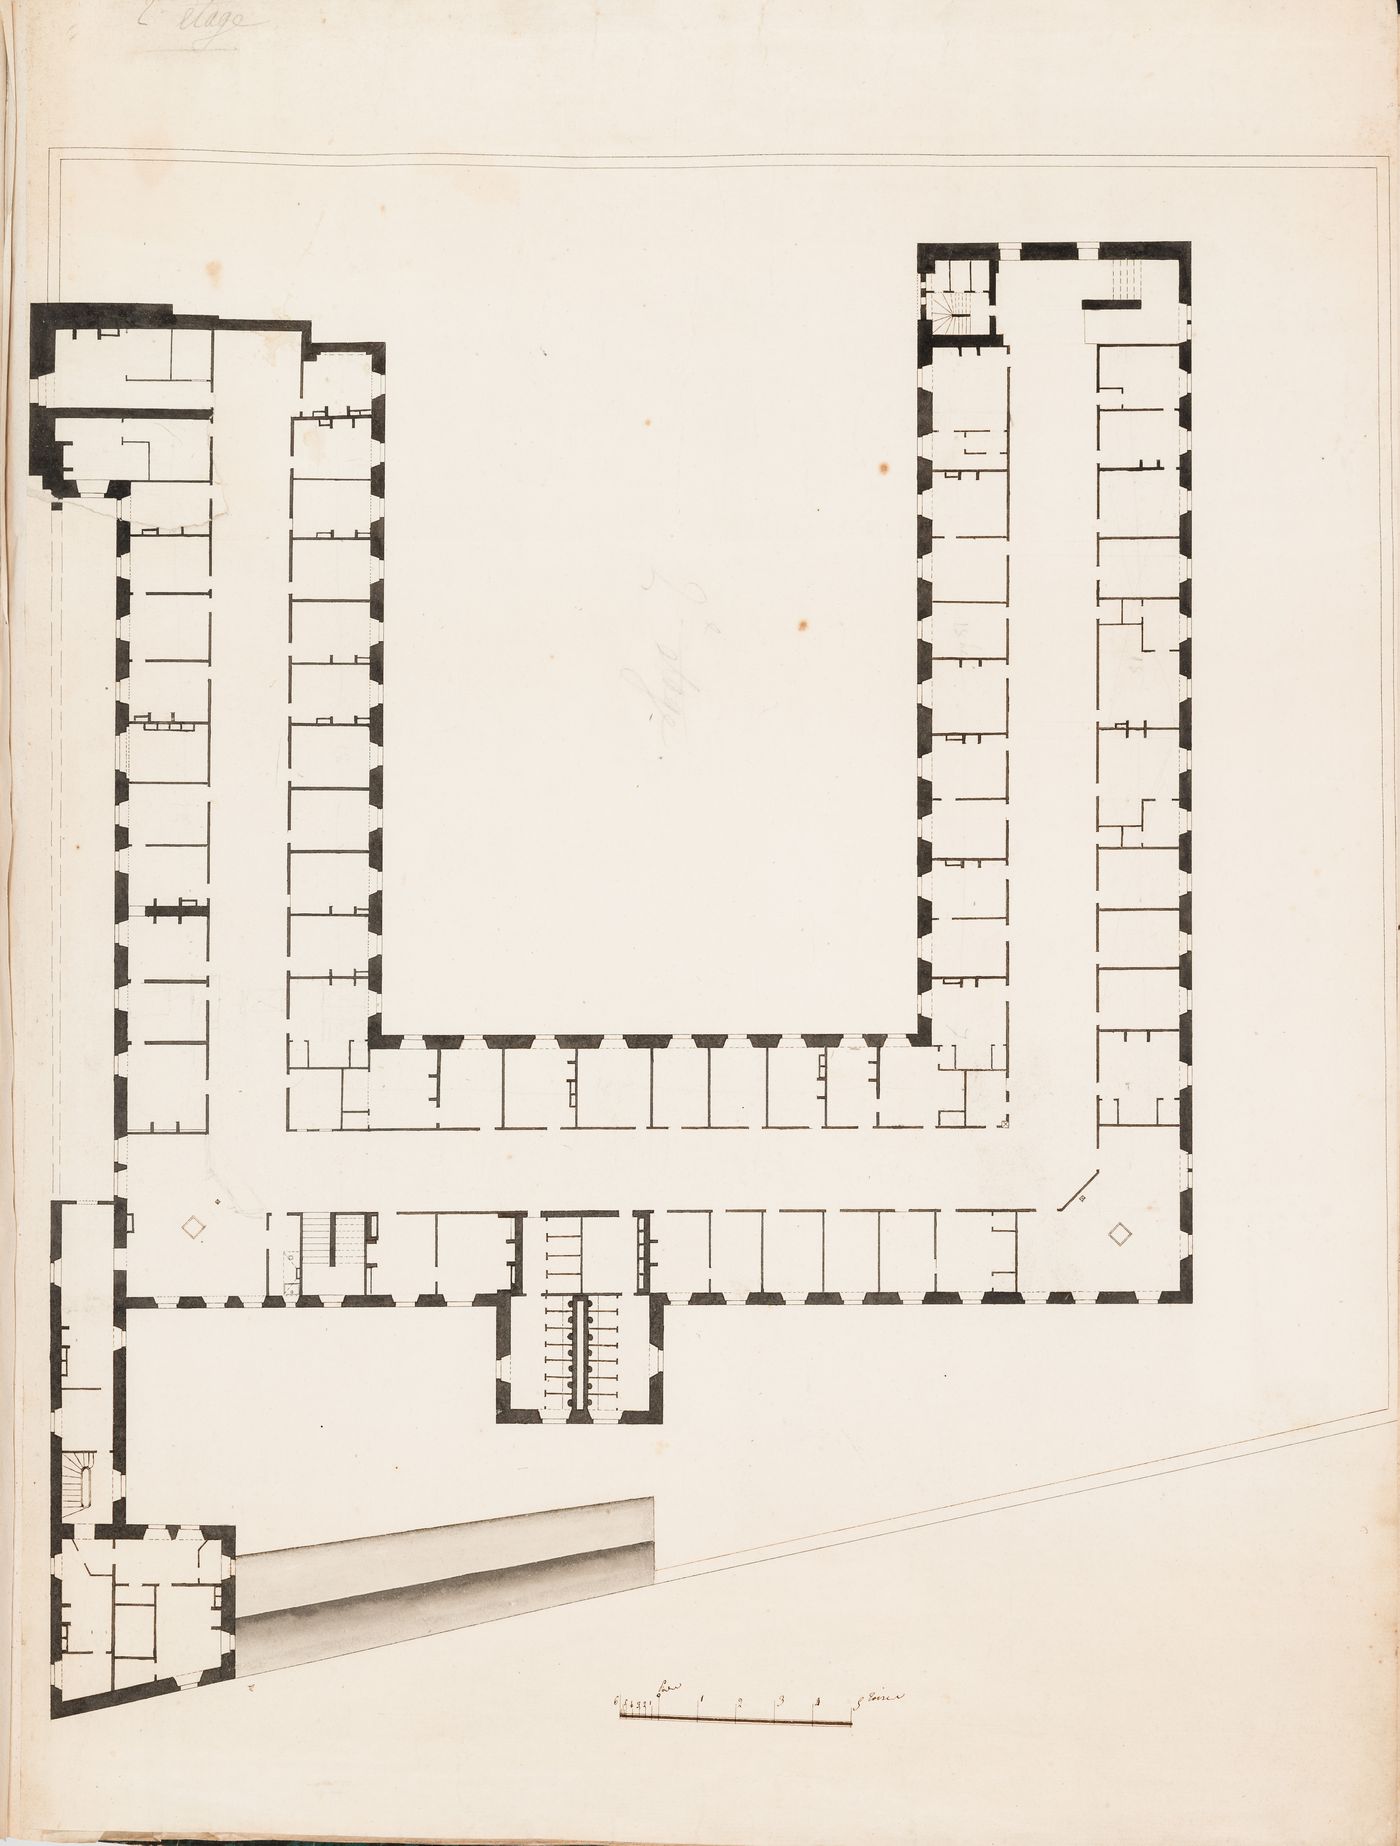 Project for alterations to the Caserne des Minimes, rue des Minimes: Second floor plan